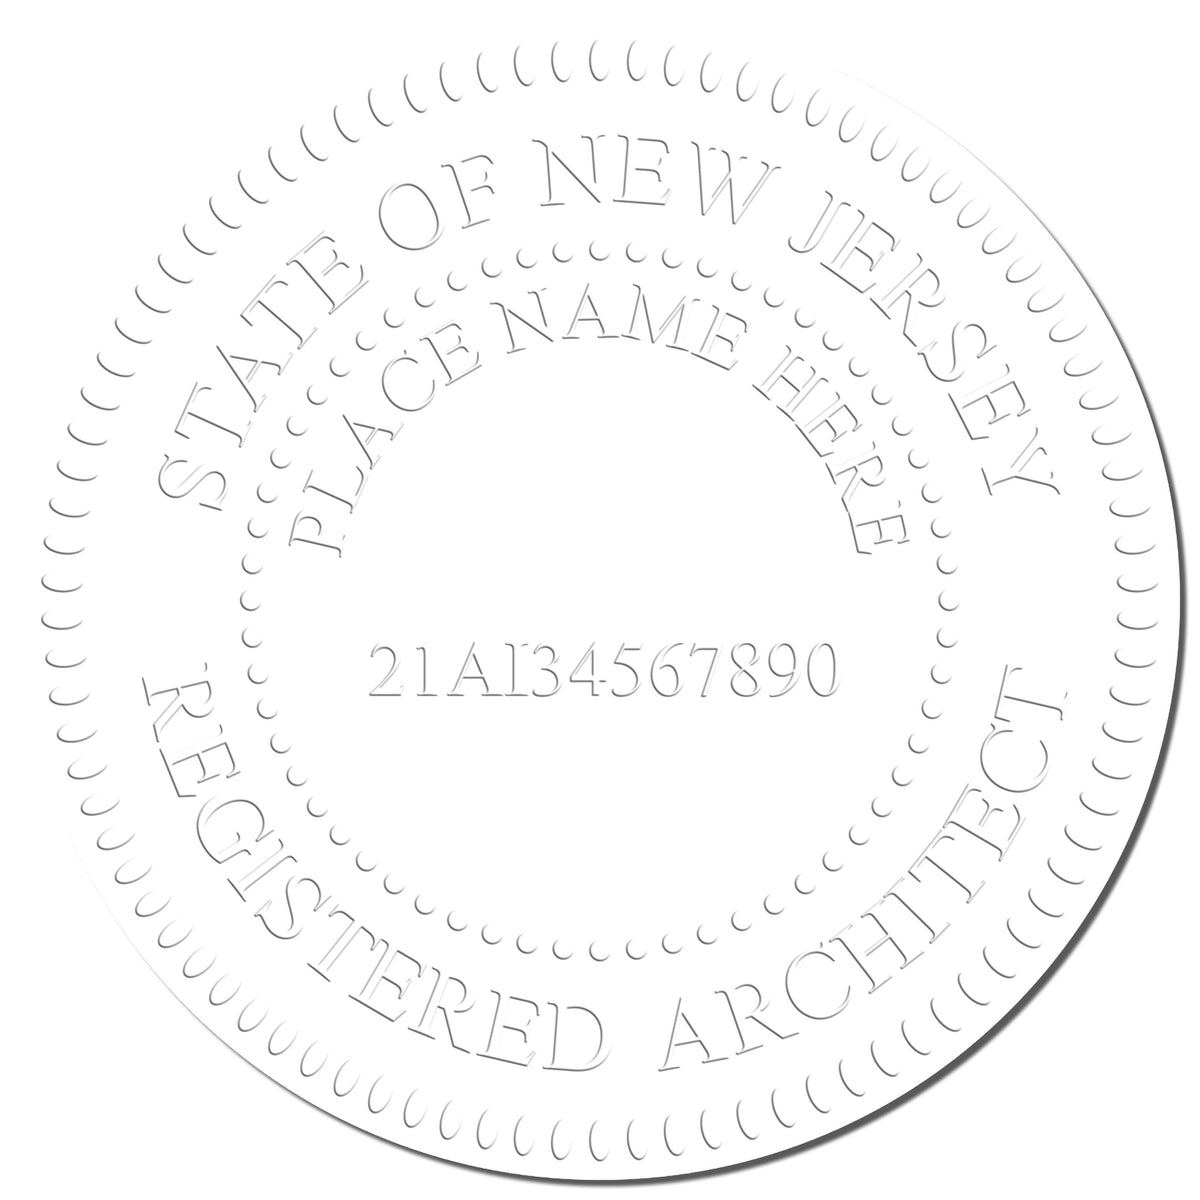 This paper is stamped with a sample imprint of the State of New Jersey Architectural Seal Embosser, signifying its quality and reliability.